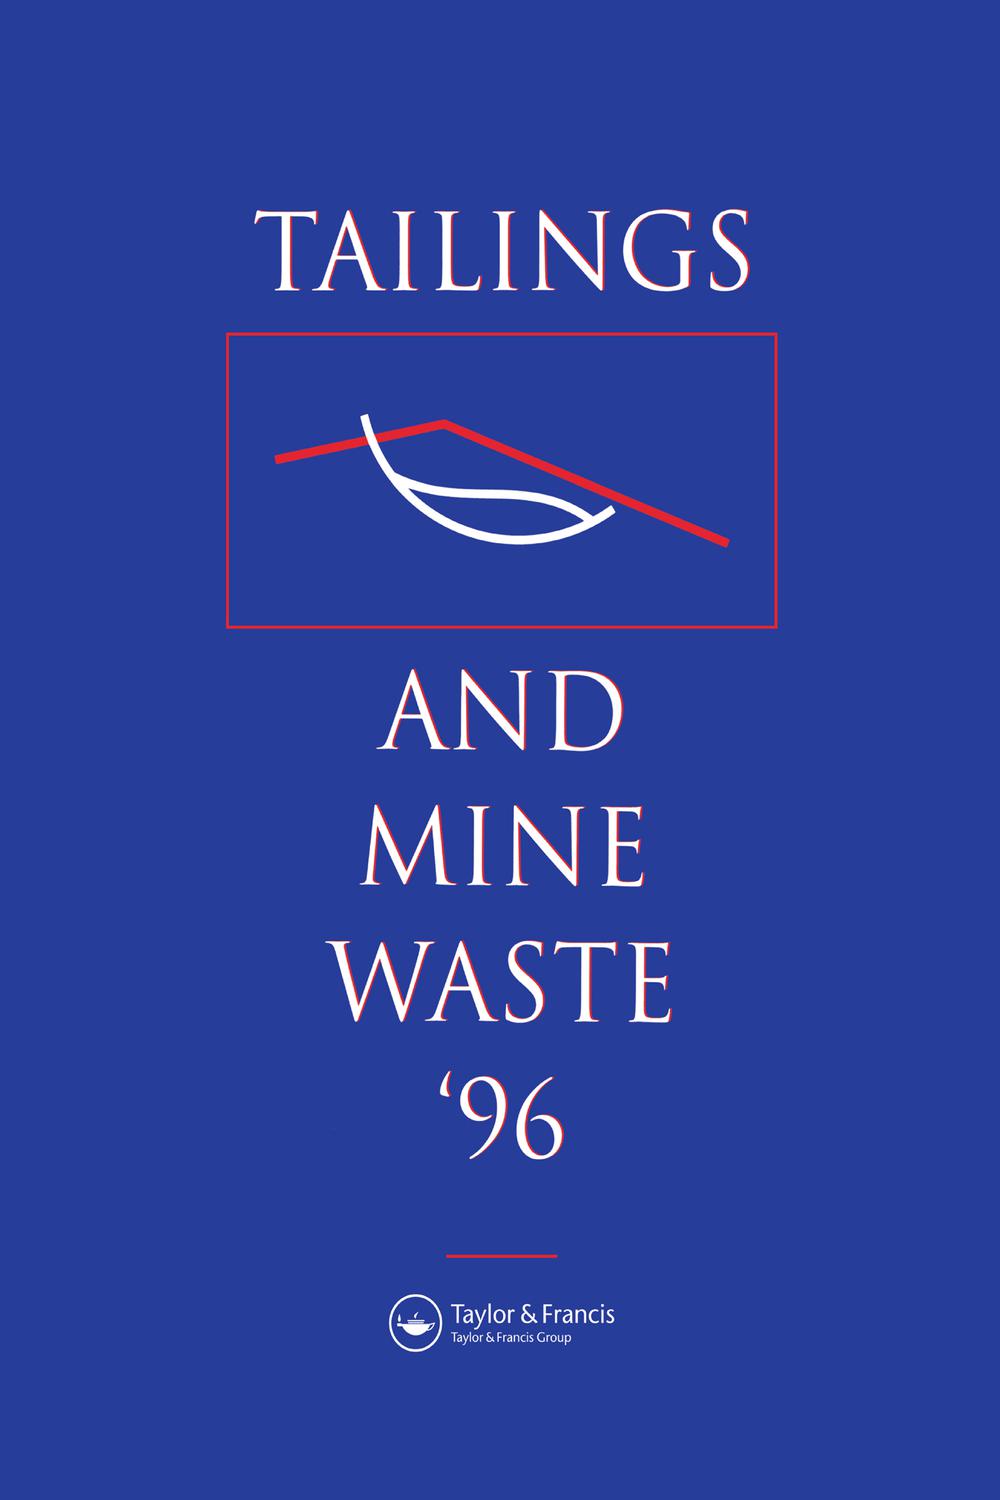 Tailings and Mine Waste 1996 - Colorado State University